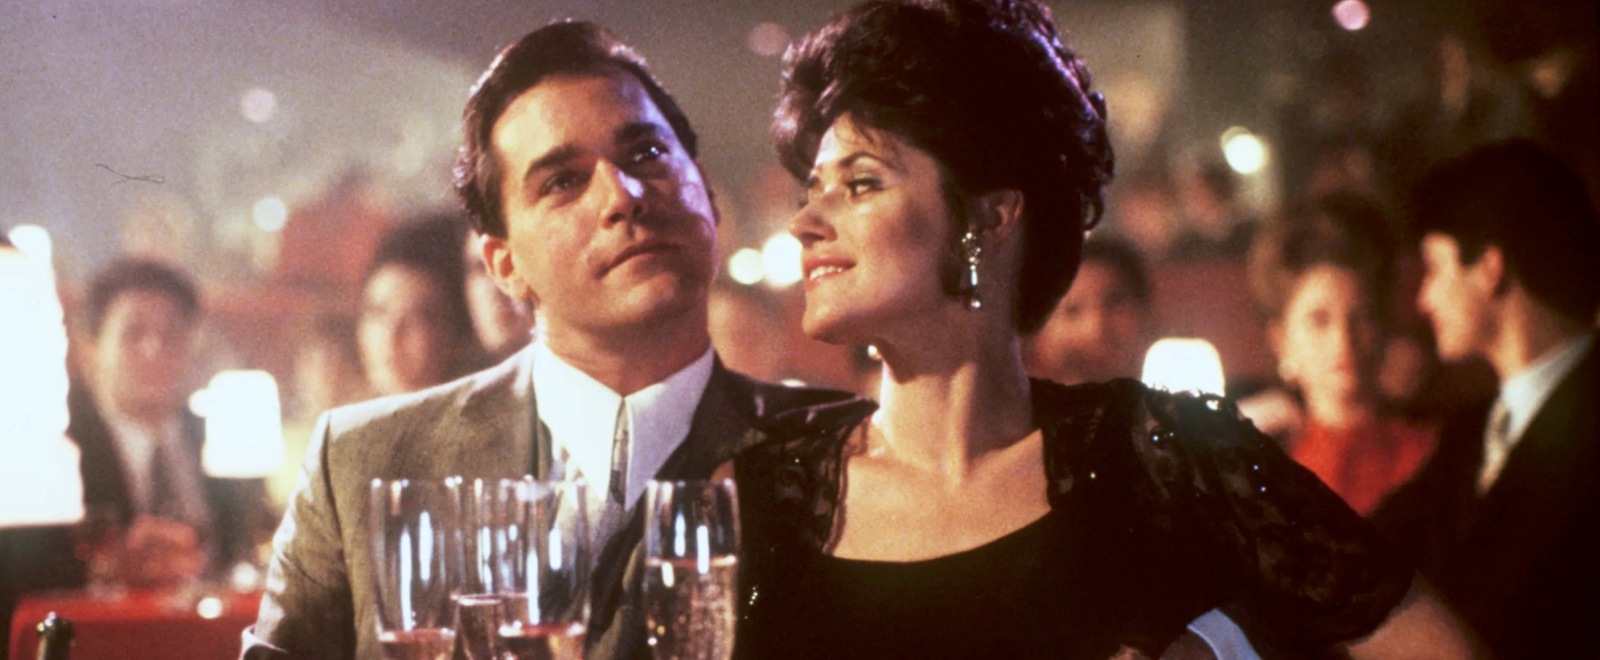 Lorraine Bracco Paid Tribute To Ray Liotta By Calling Him The ‘Best Part’ About Making ‘Goodfellas’